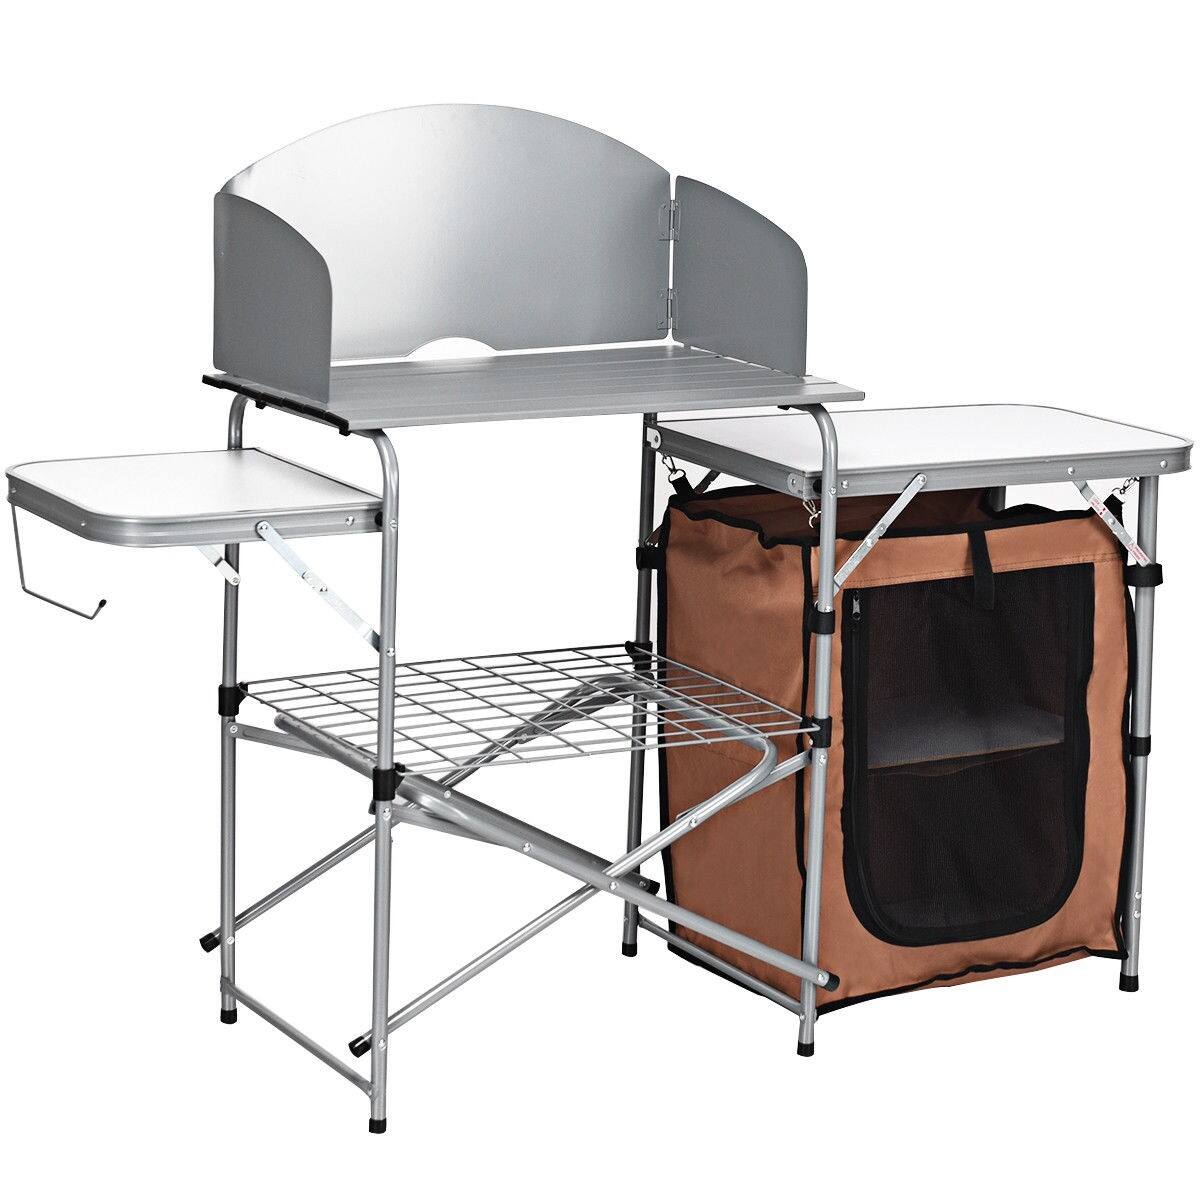 Costway Foldable Outdoor BBQ Portable Grilling Table With Windscreen Bag - $77.95 + Free Shipping